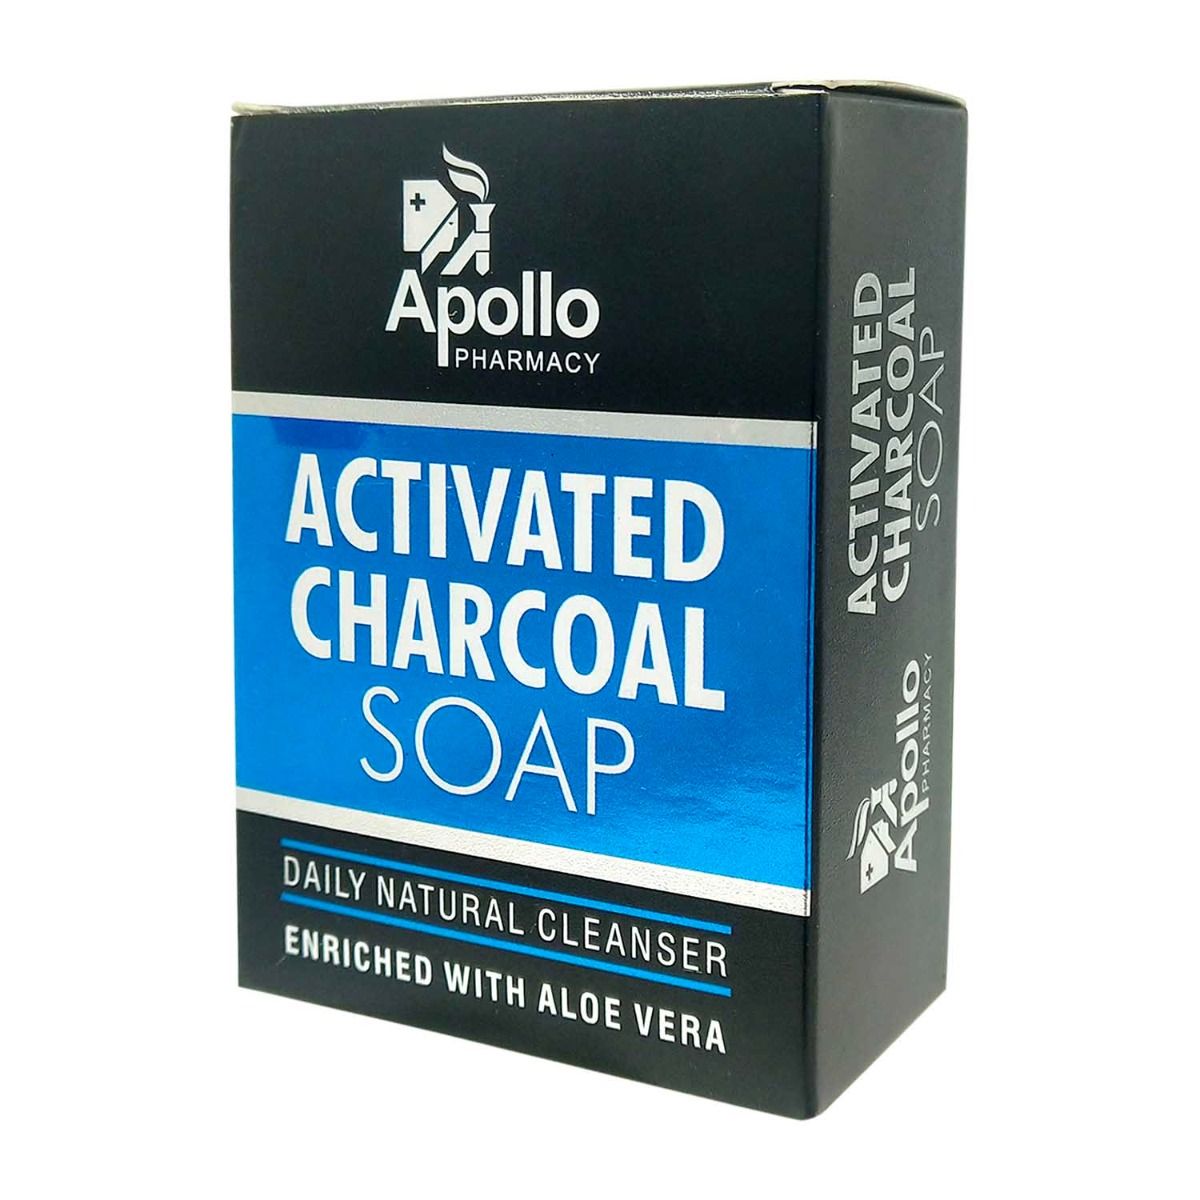 Apollo Pharmacy Activated Charcoal Soap, 125 gm, Pack of 1 